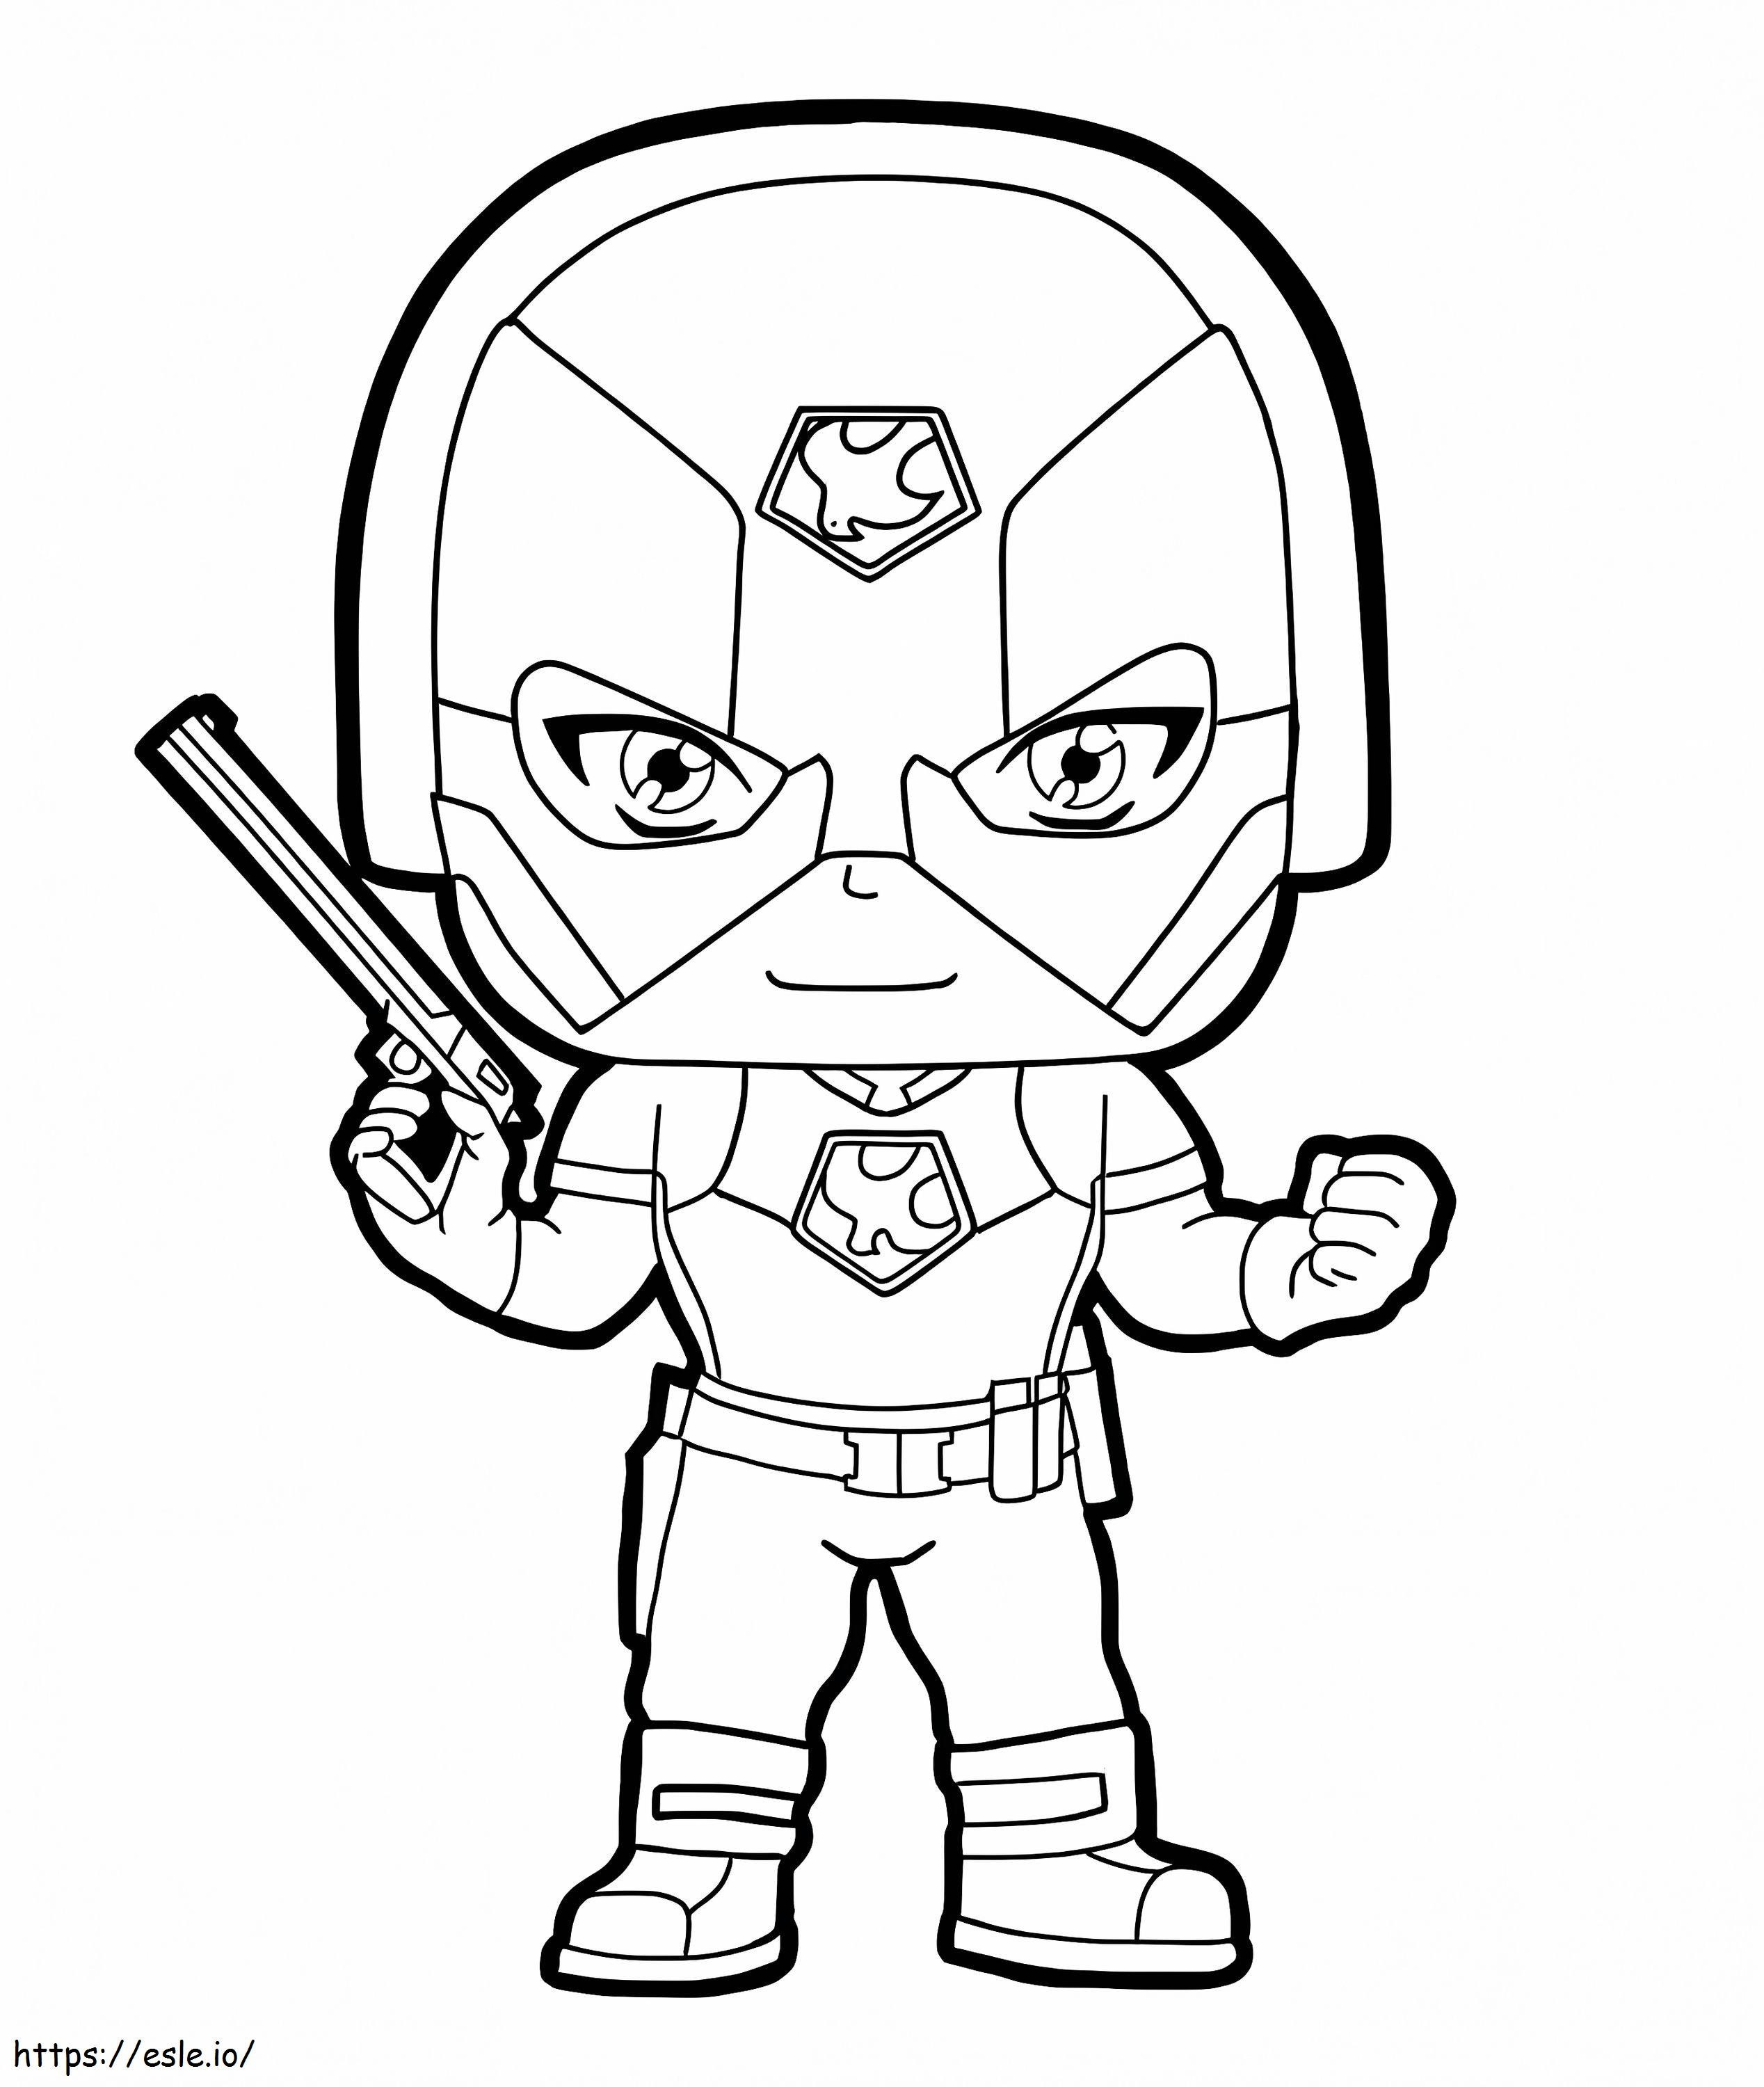 Cute Peacemaker coloring page